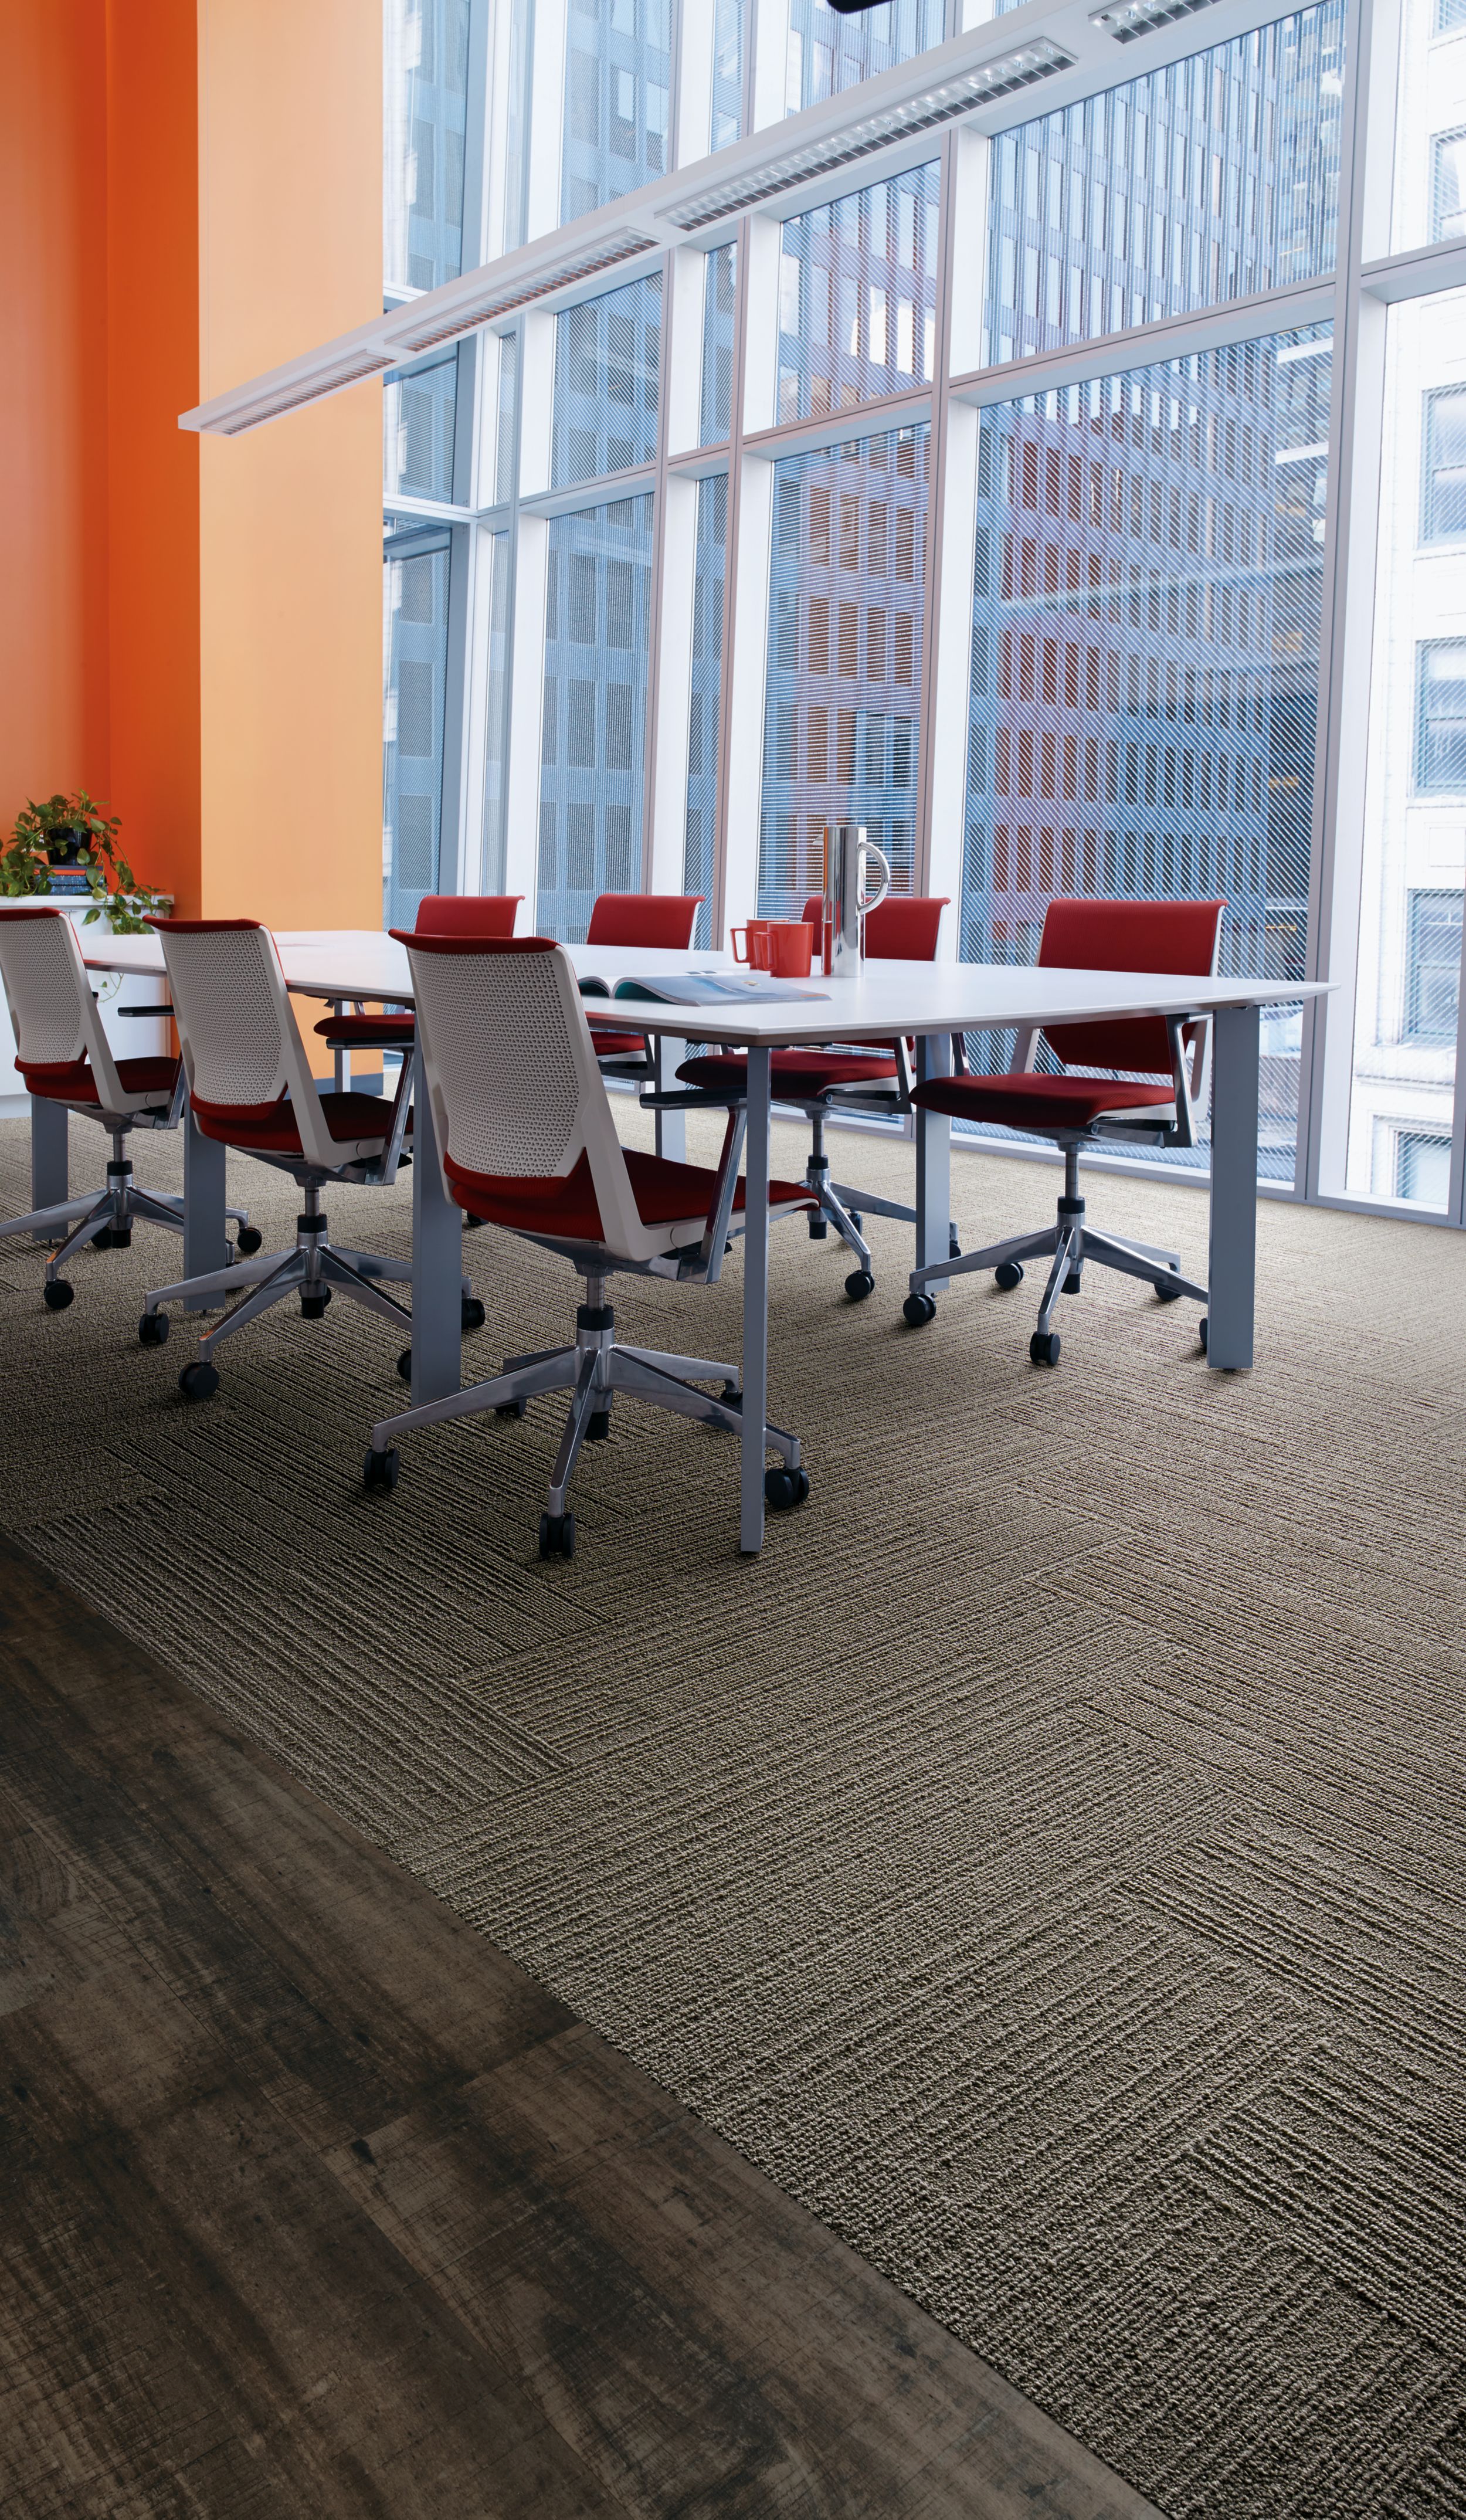 Interface On Line plank carpet tile in meeting room with orange wall and red chairs Bildnummer 8